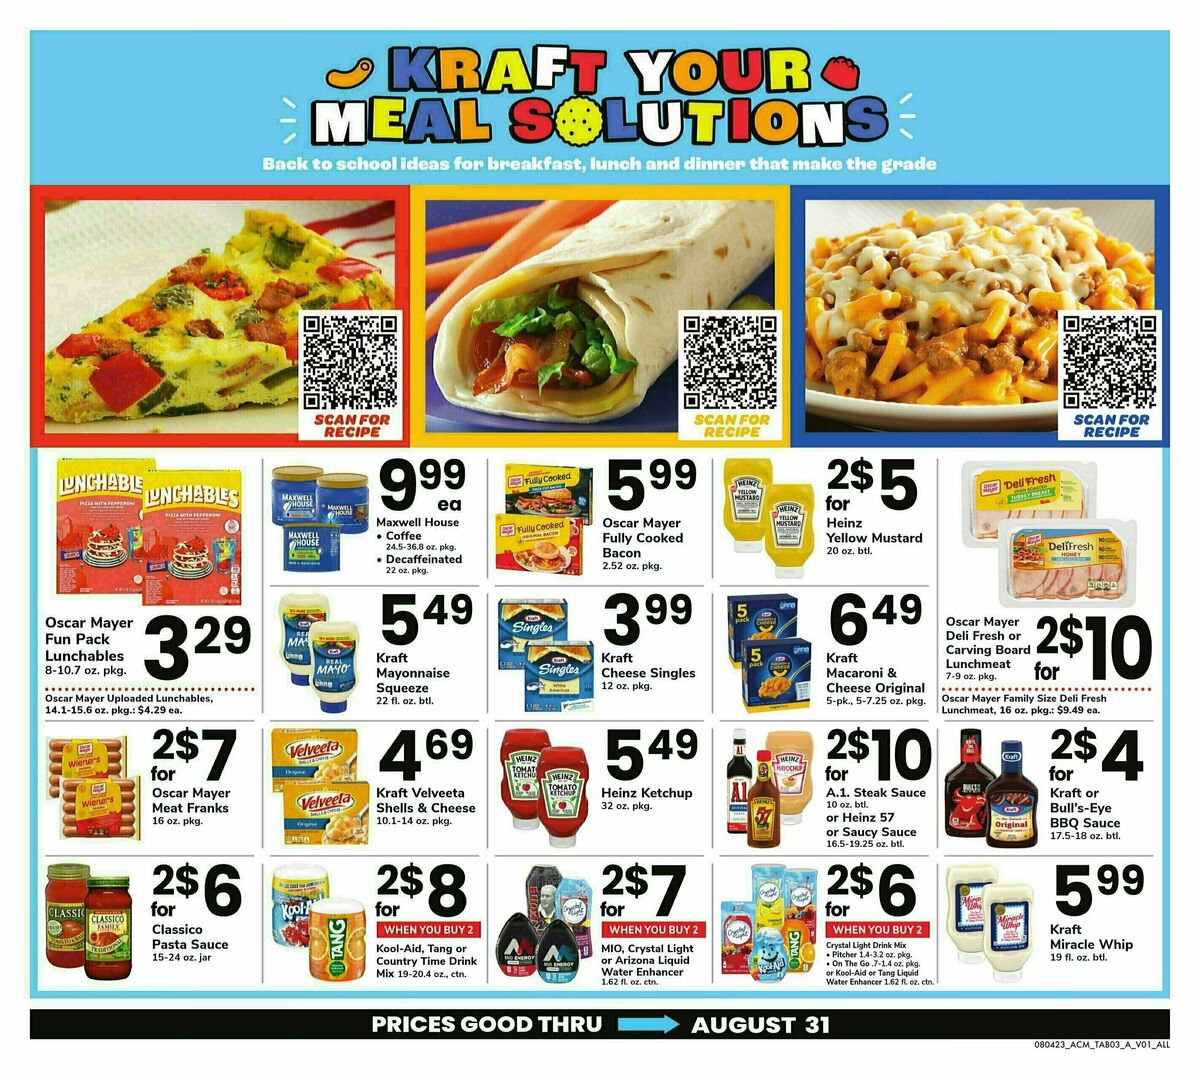 ACME Markets Big Book of Savings Weekly Ad from August 4